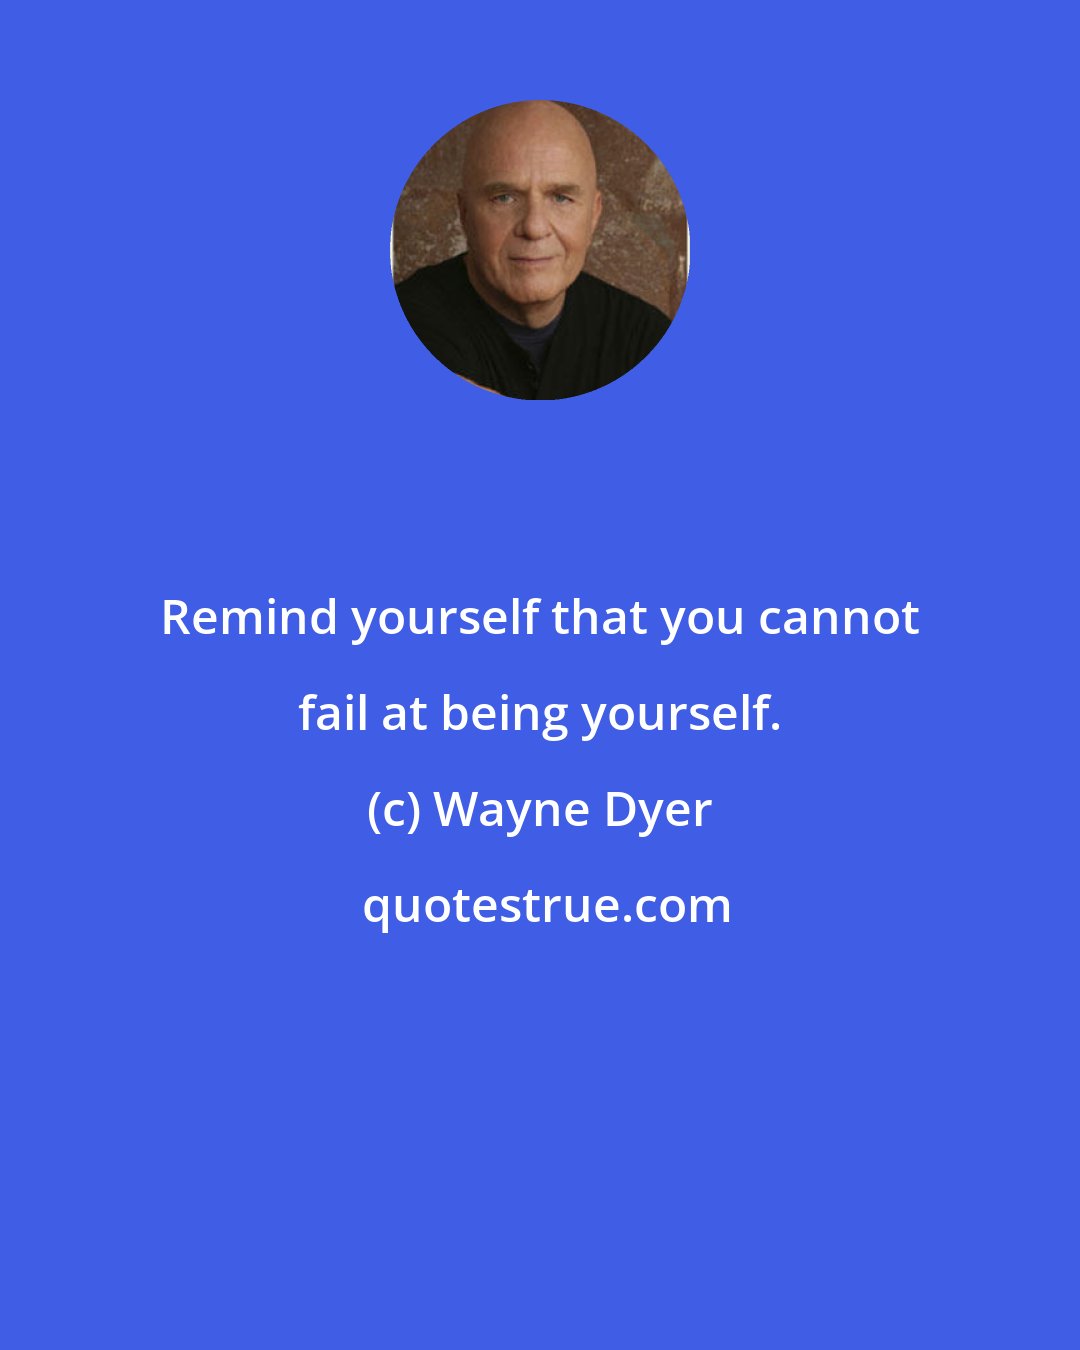 Wayne Dyer: Remind yourself that you cannot fail at being yourself.